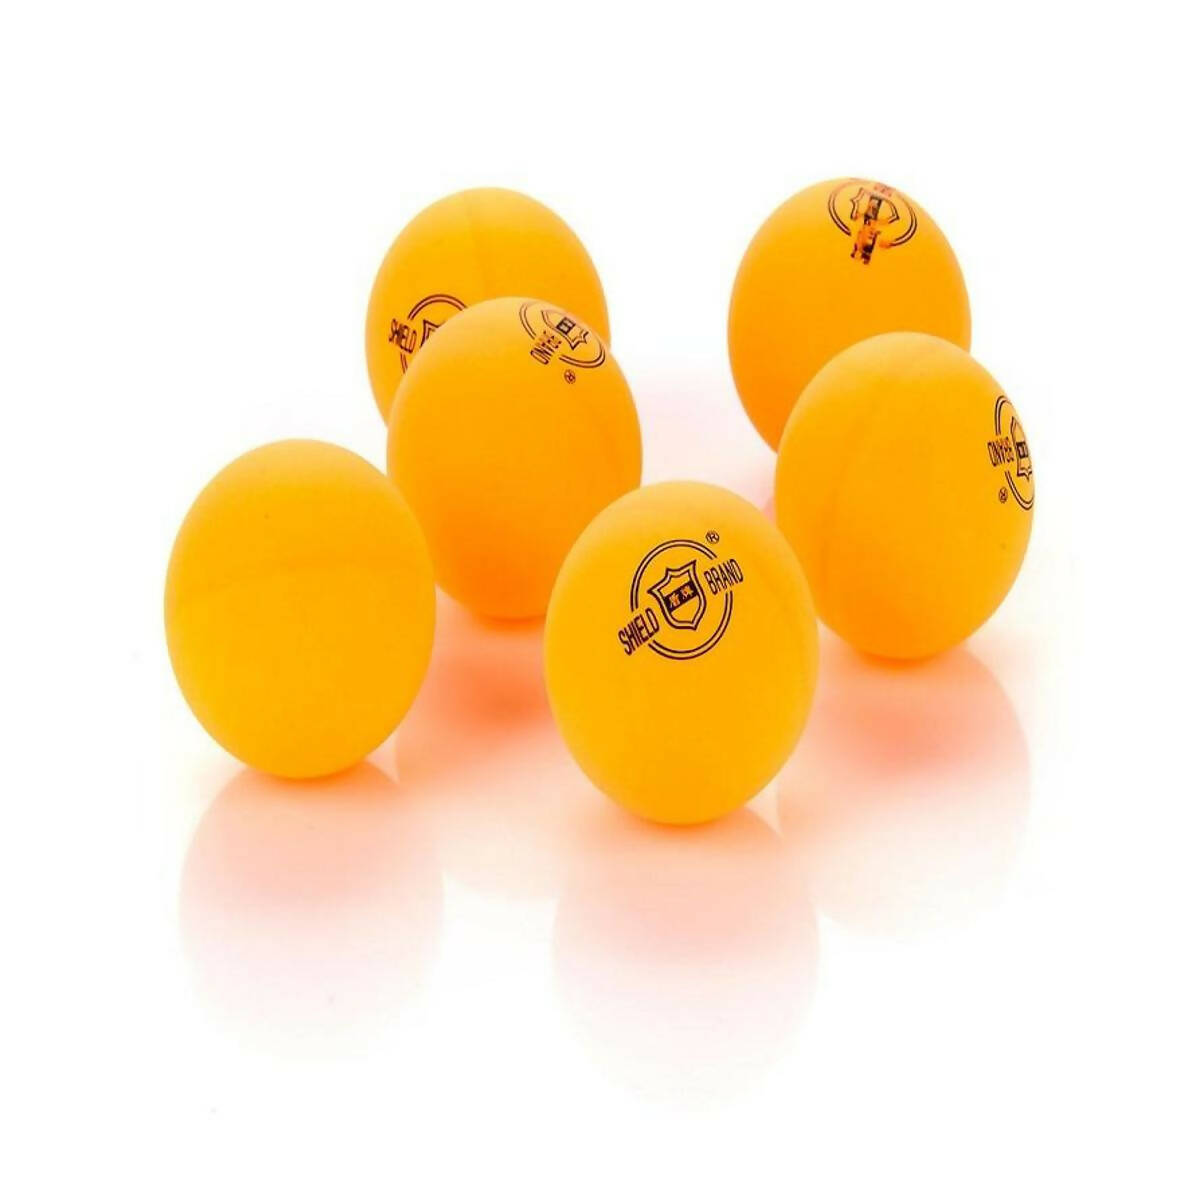 Pack of 6 - NEW SHIELD Table Tennis Ping Pong Balls - Orange